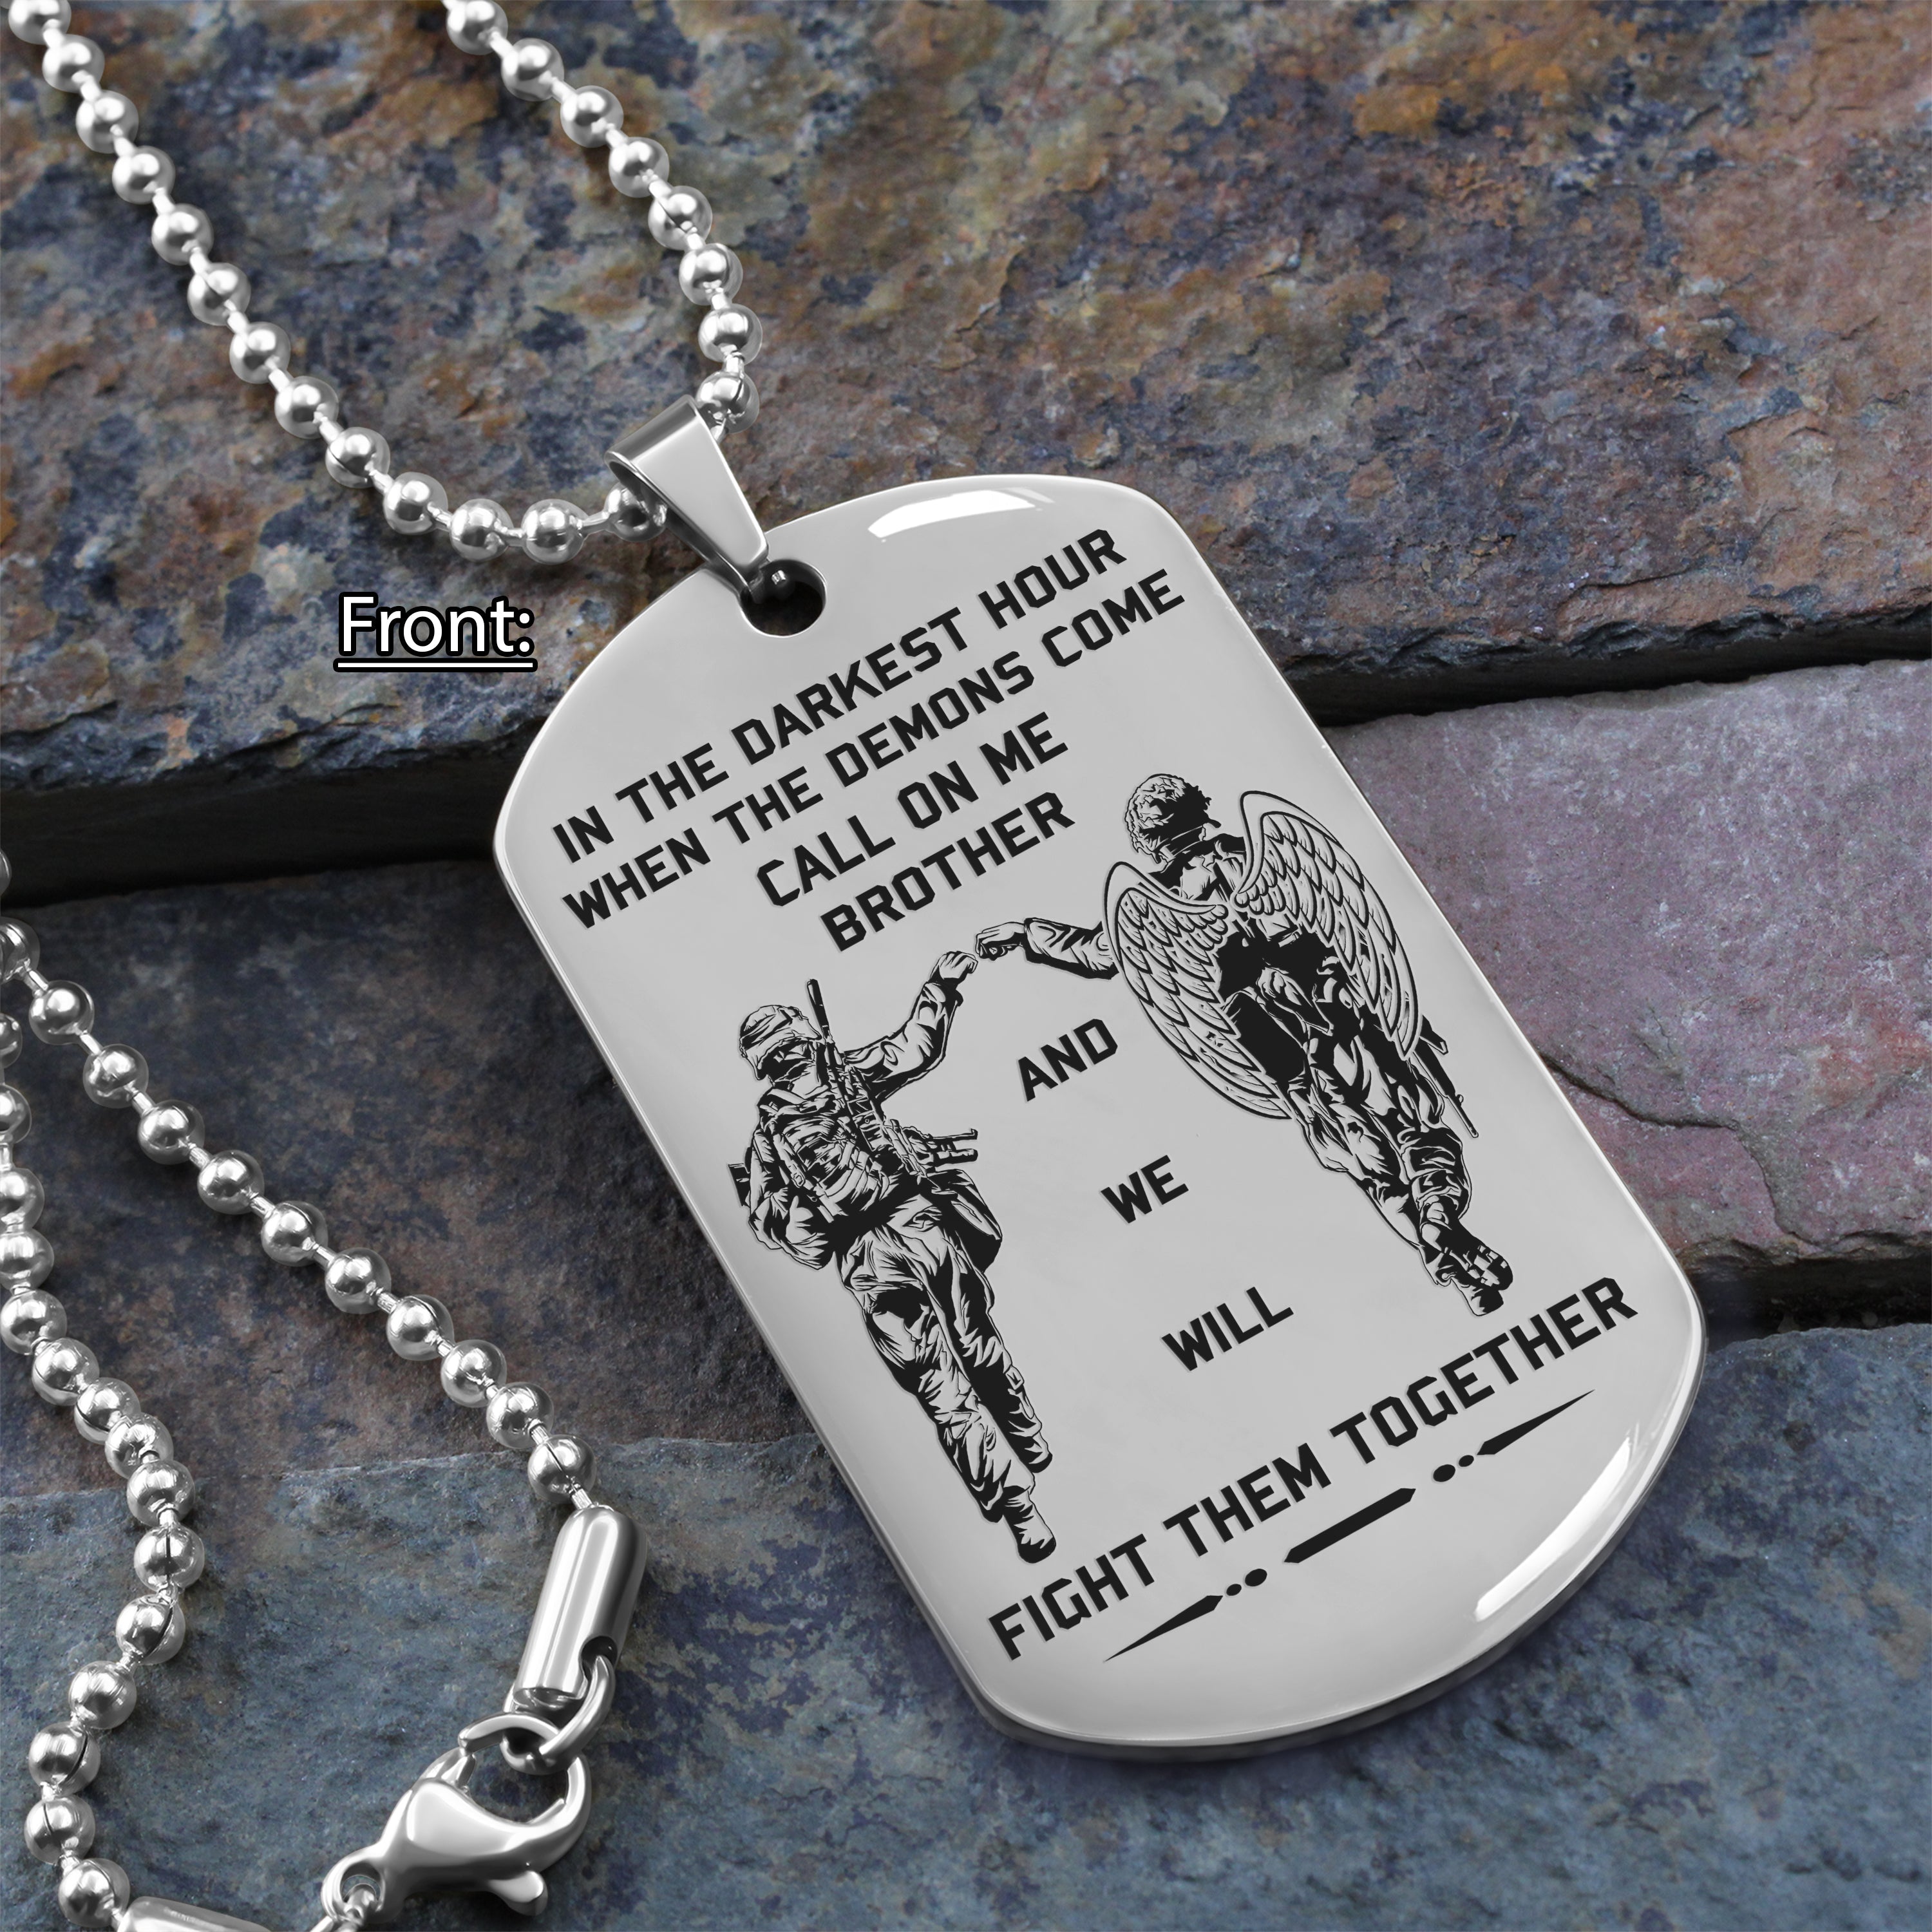 Samurai Customizable engraved brother dog tag gift from brother, In the darkest hour, When the demons come call on me brother and we will fight them together